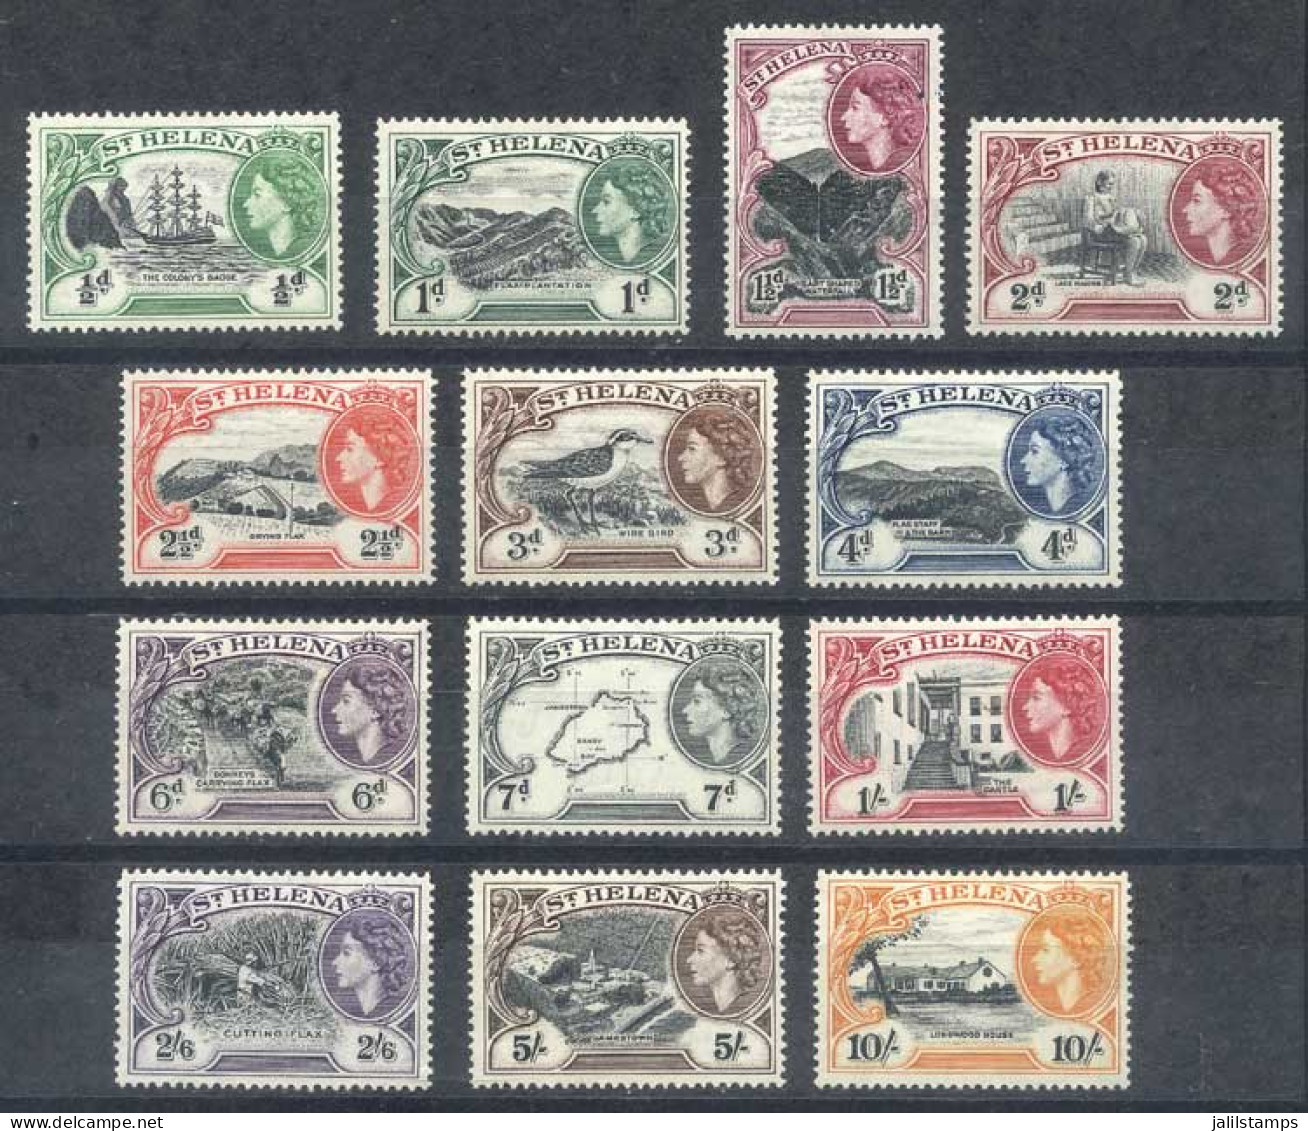 SAINT HELENA: Sc.140/152, 1953 Bird And Landscapes, Complete Set Of 13 Values, Very Fine Quality, Catalog Value US$103+ - St. Helena